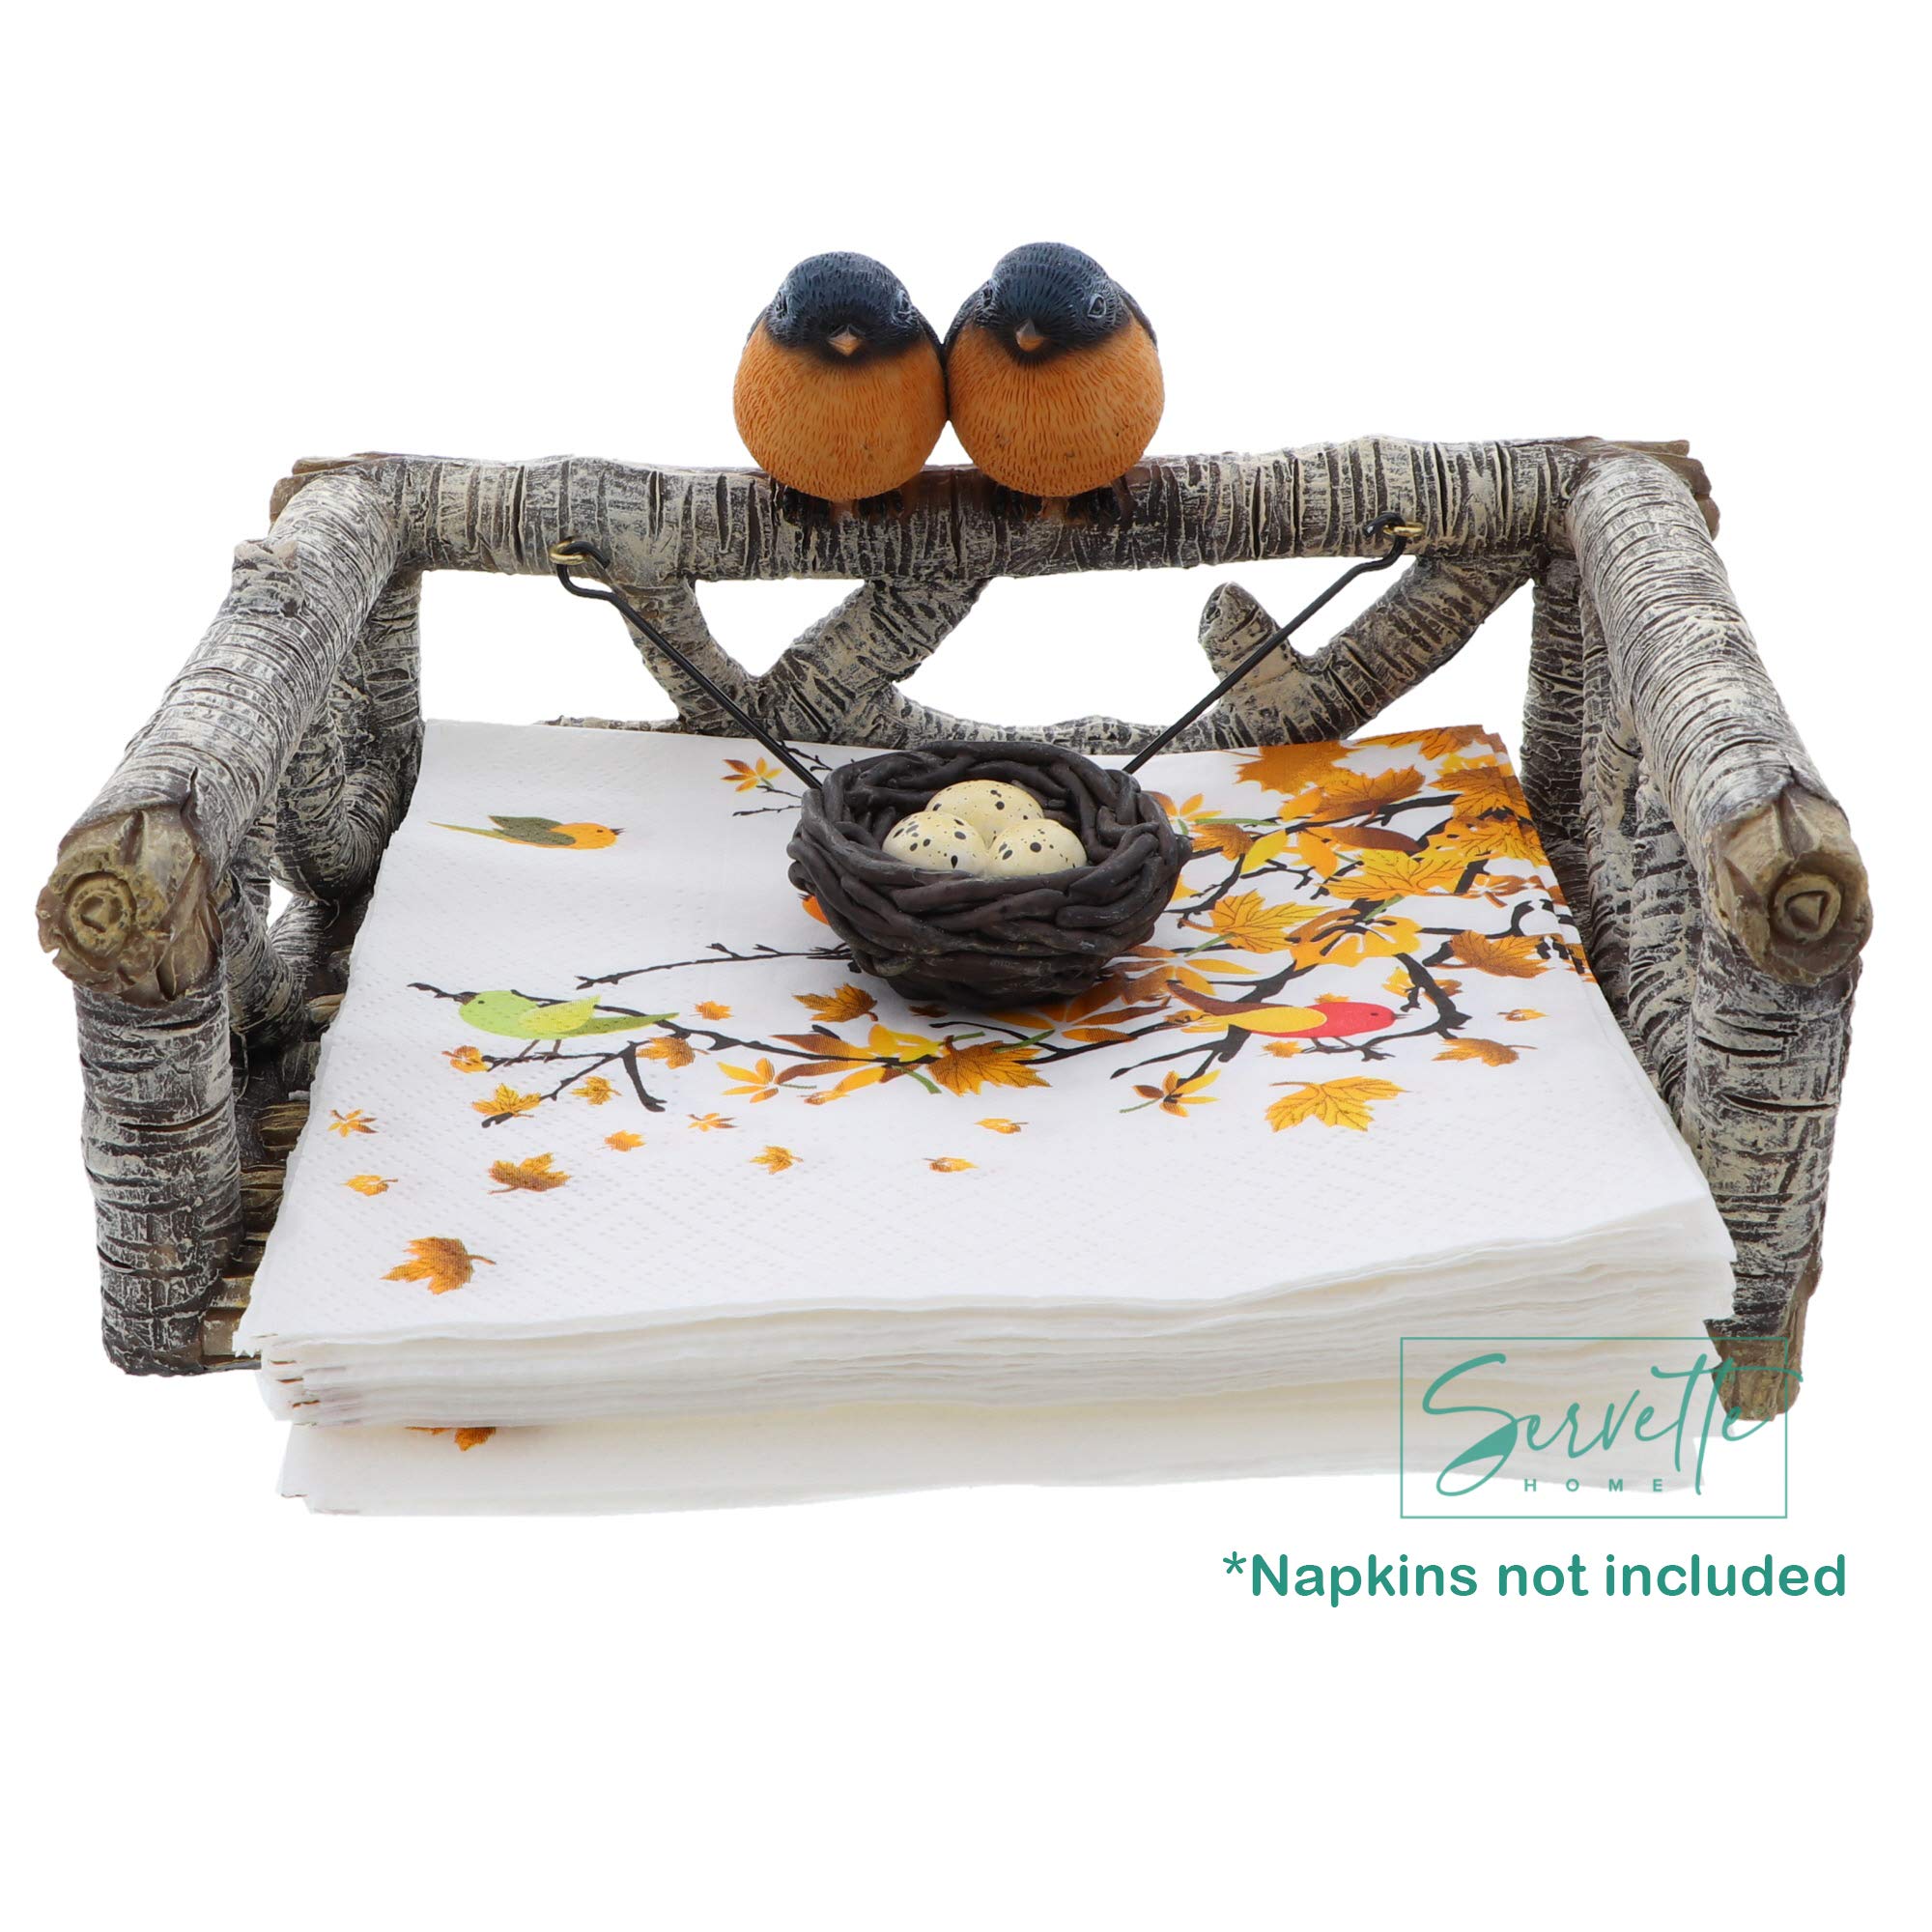 Rustic Polyresin Weighted Flat Napkin Holder - Birch Branches With Birds' Nest